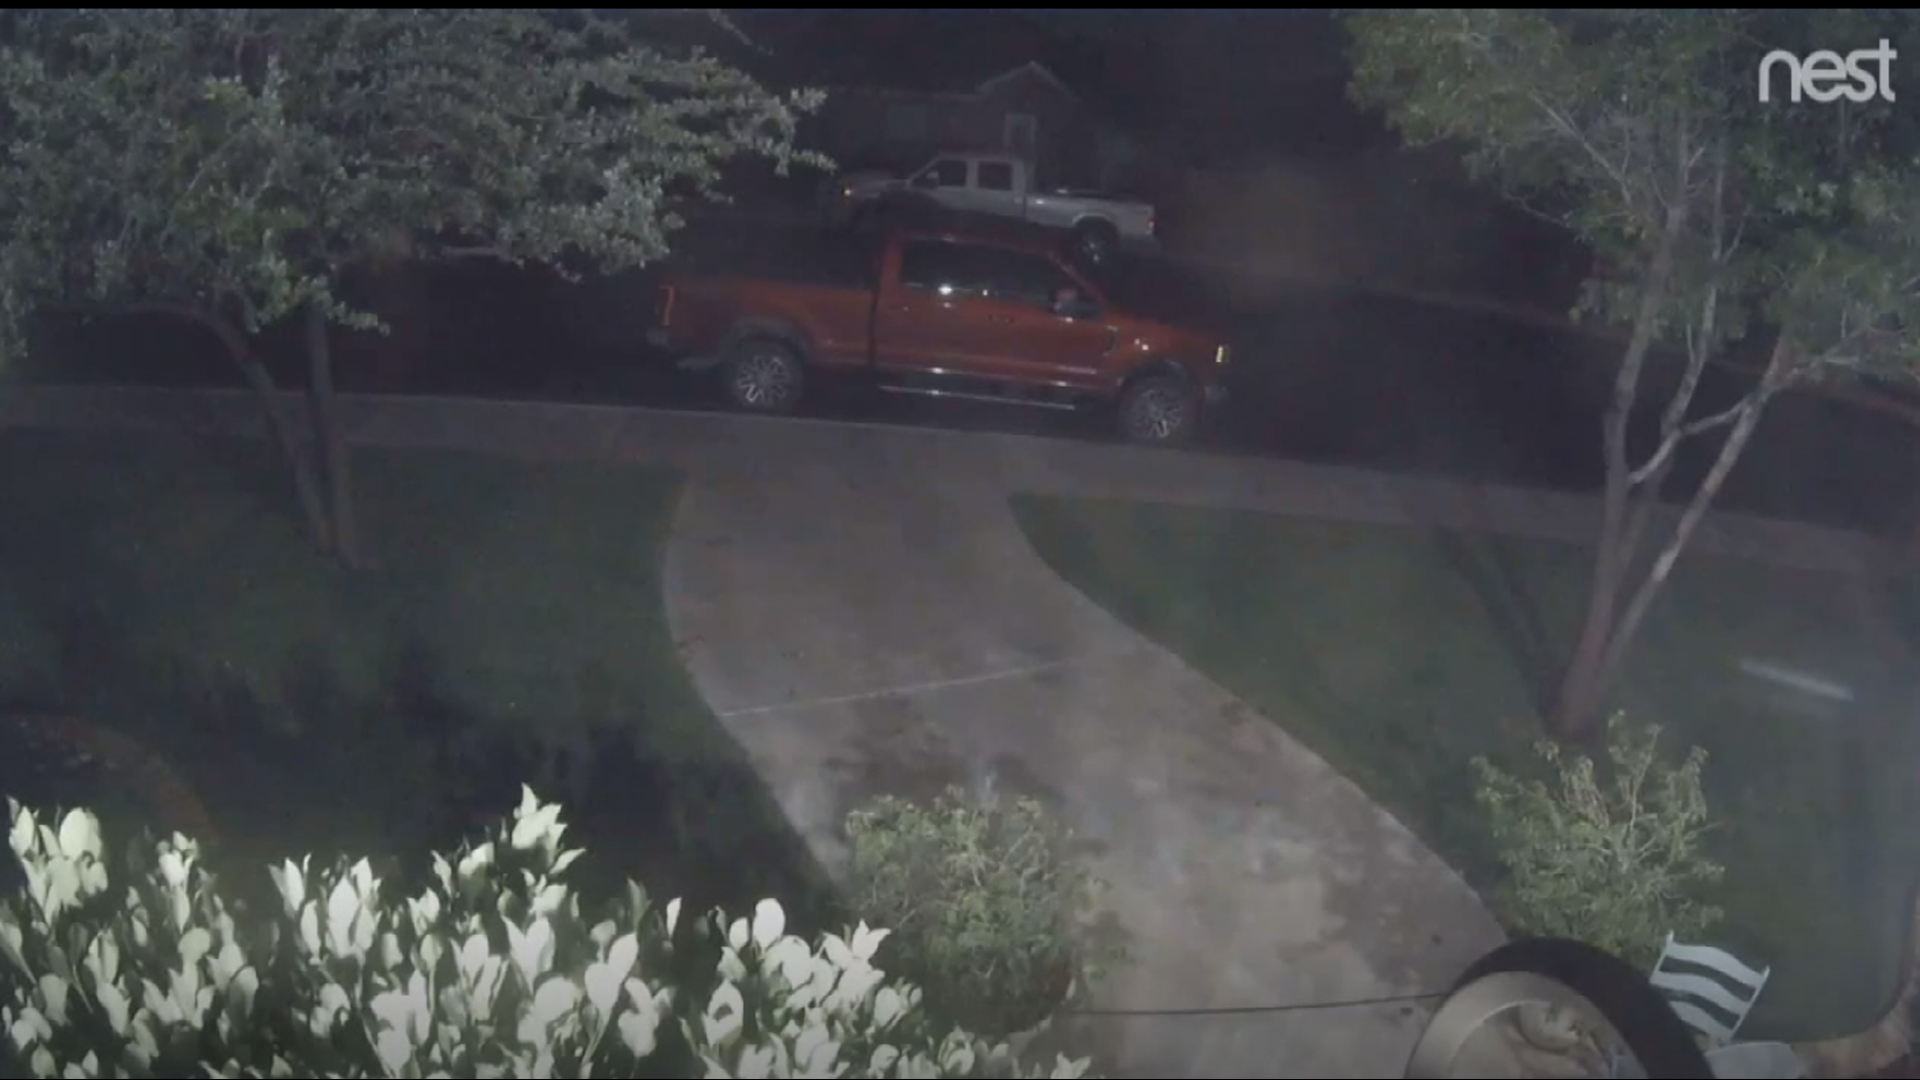 Video captured by a neighbor's surveillance system caught the sound of multiple gunshots